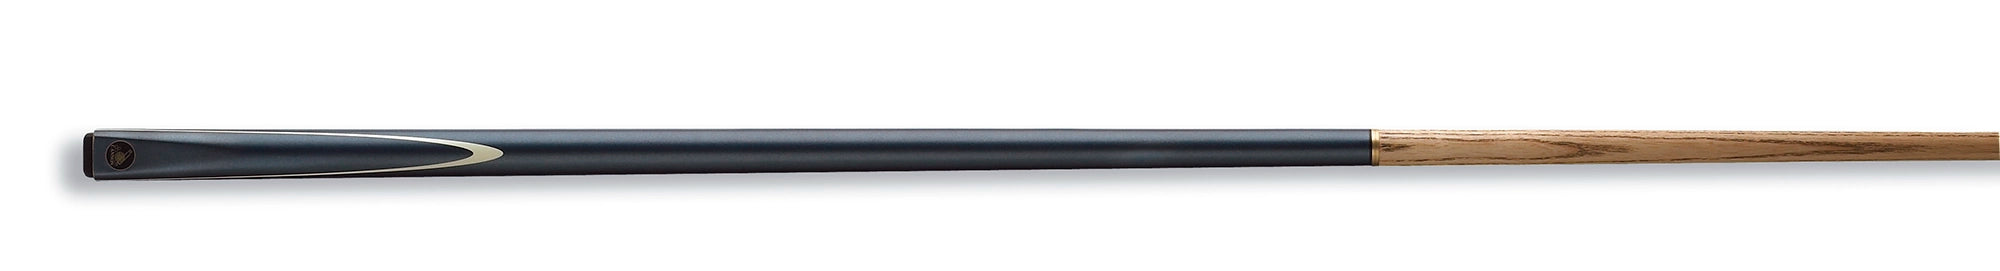 Cannon Cobra Two Piece Cue. Full Lengh view